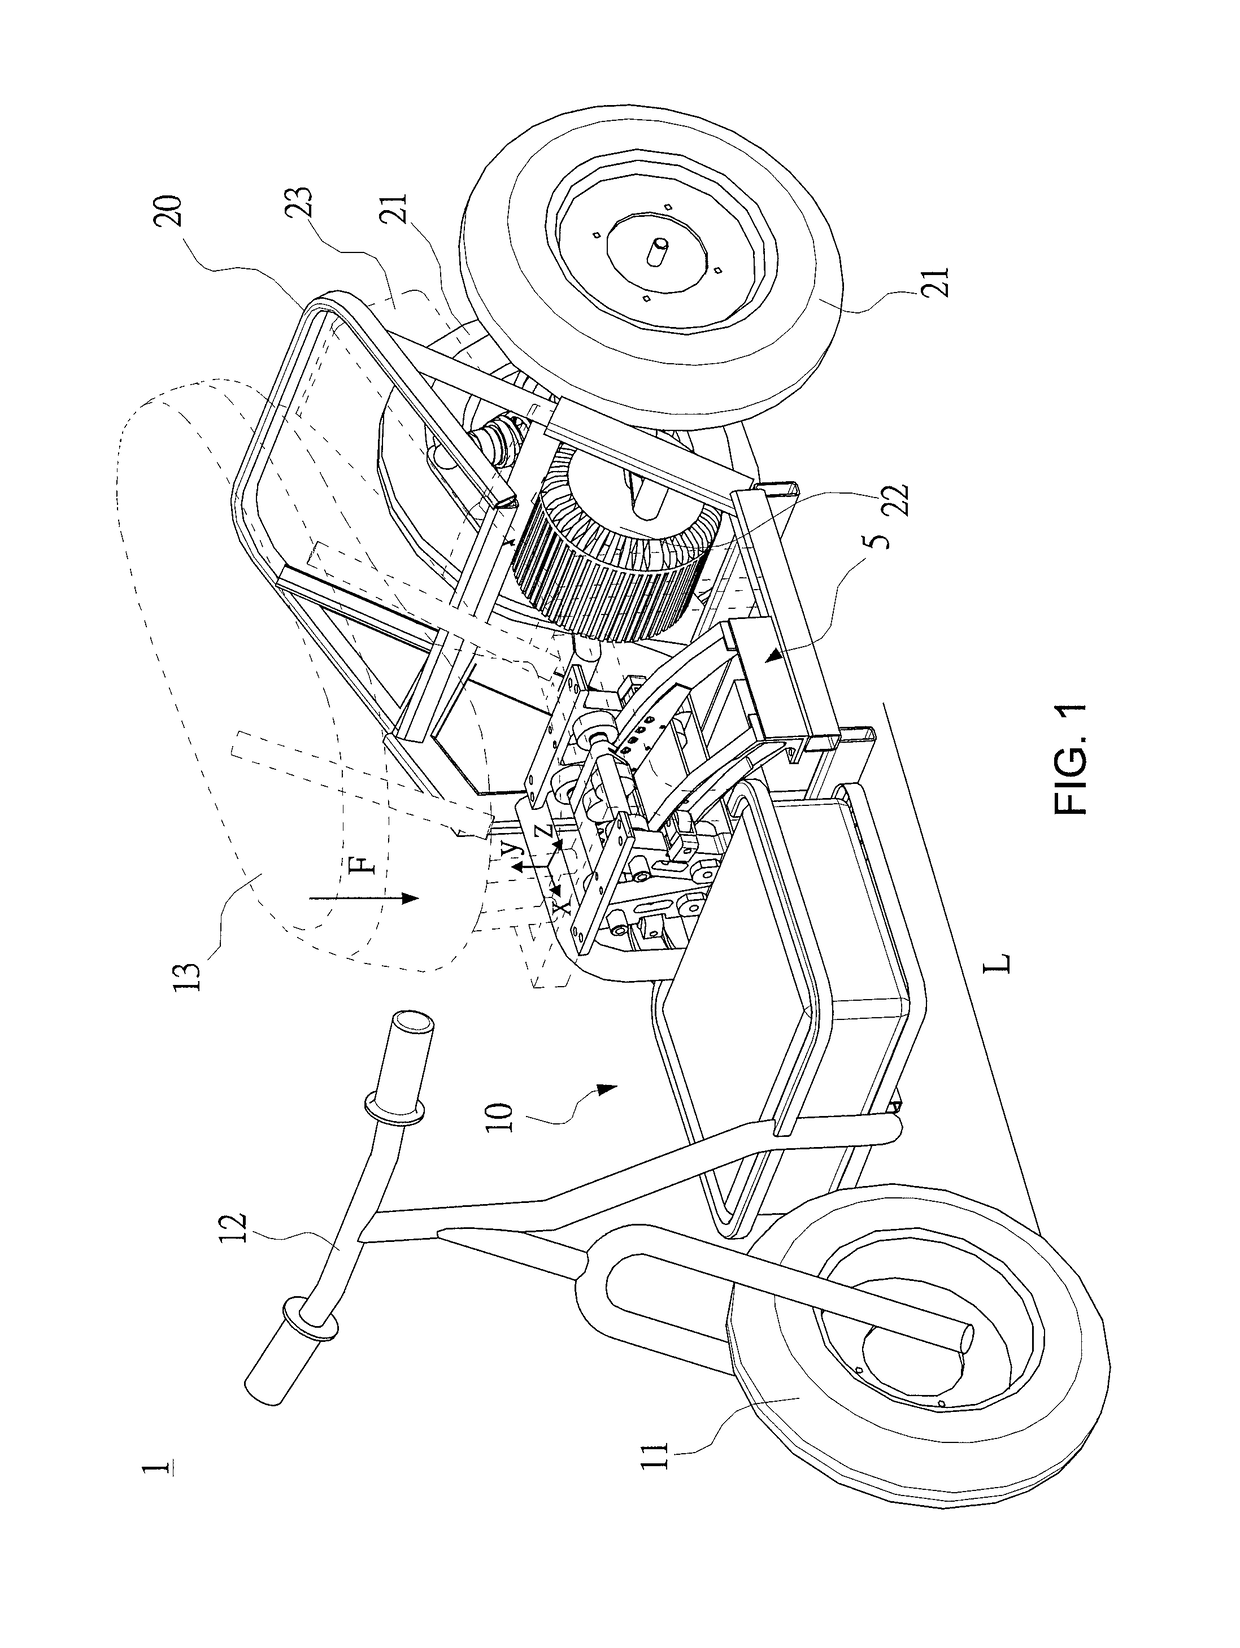 Vehicle tilting system and tricycle